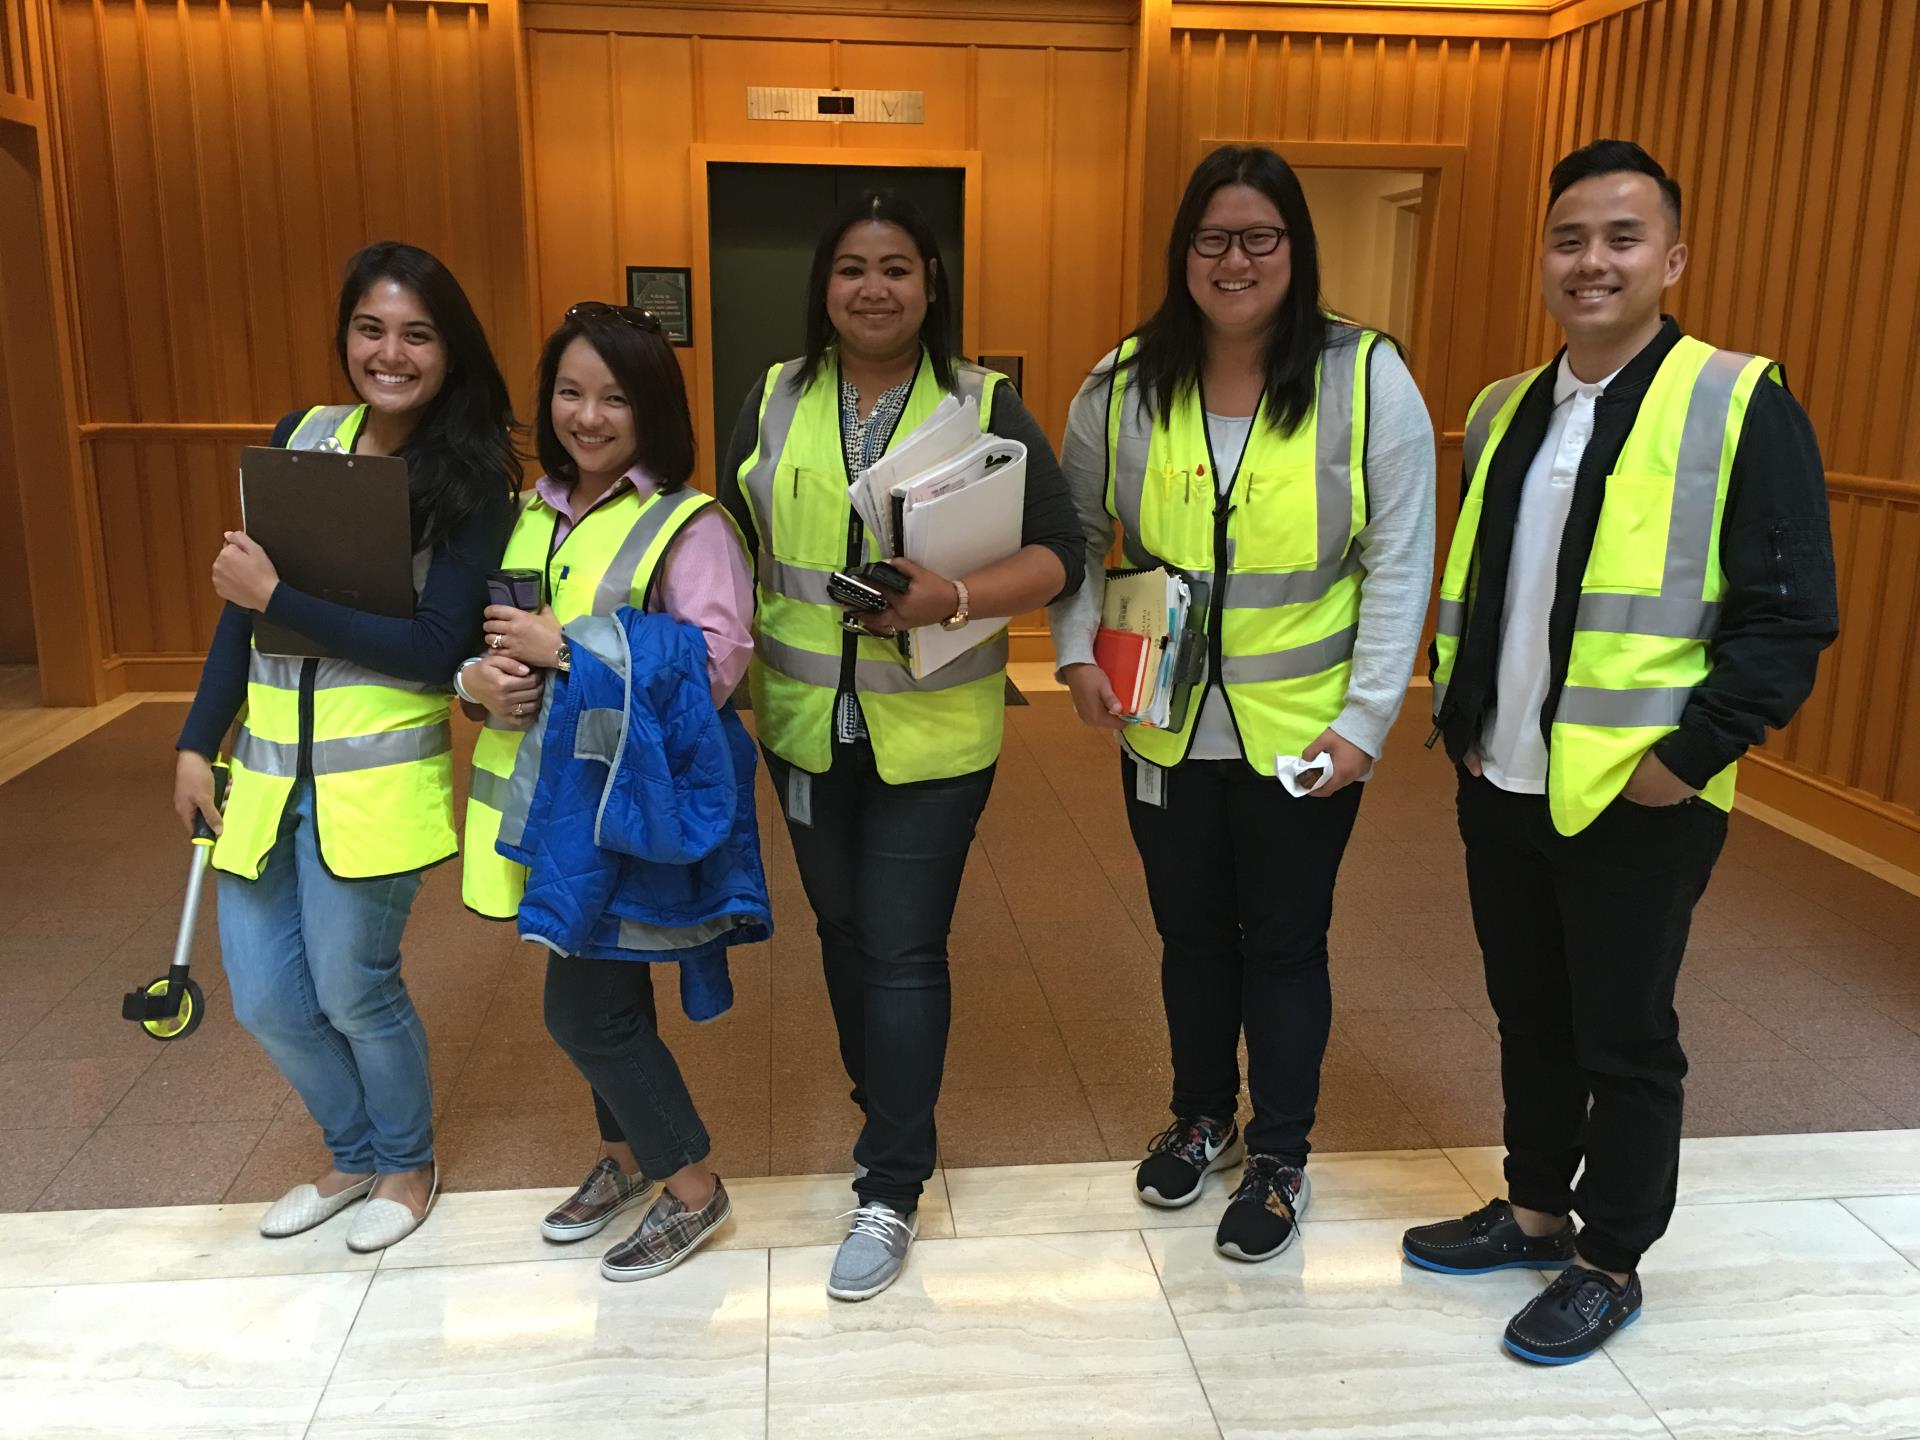 Employees in reflective vests